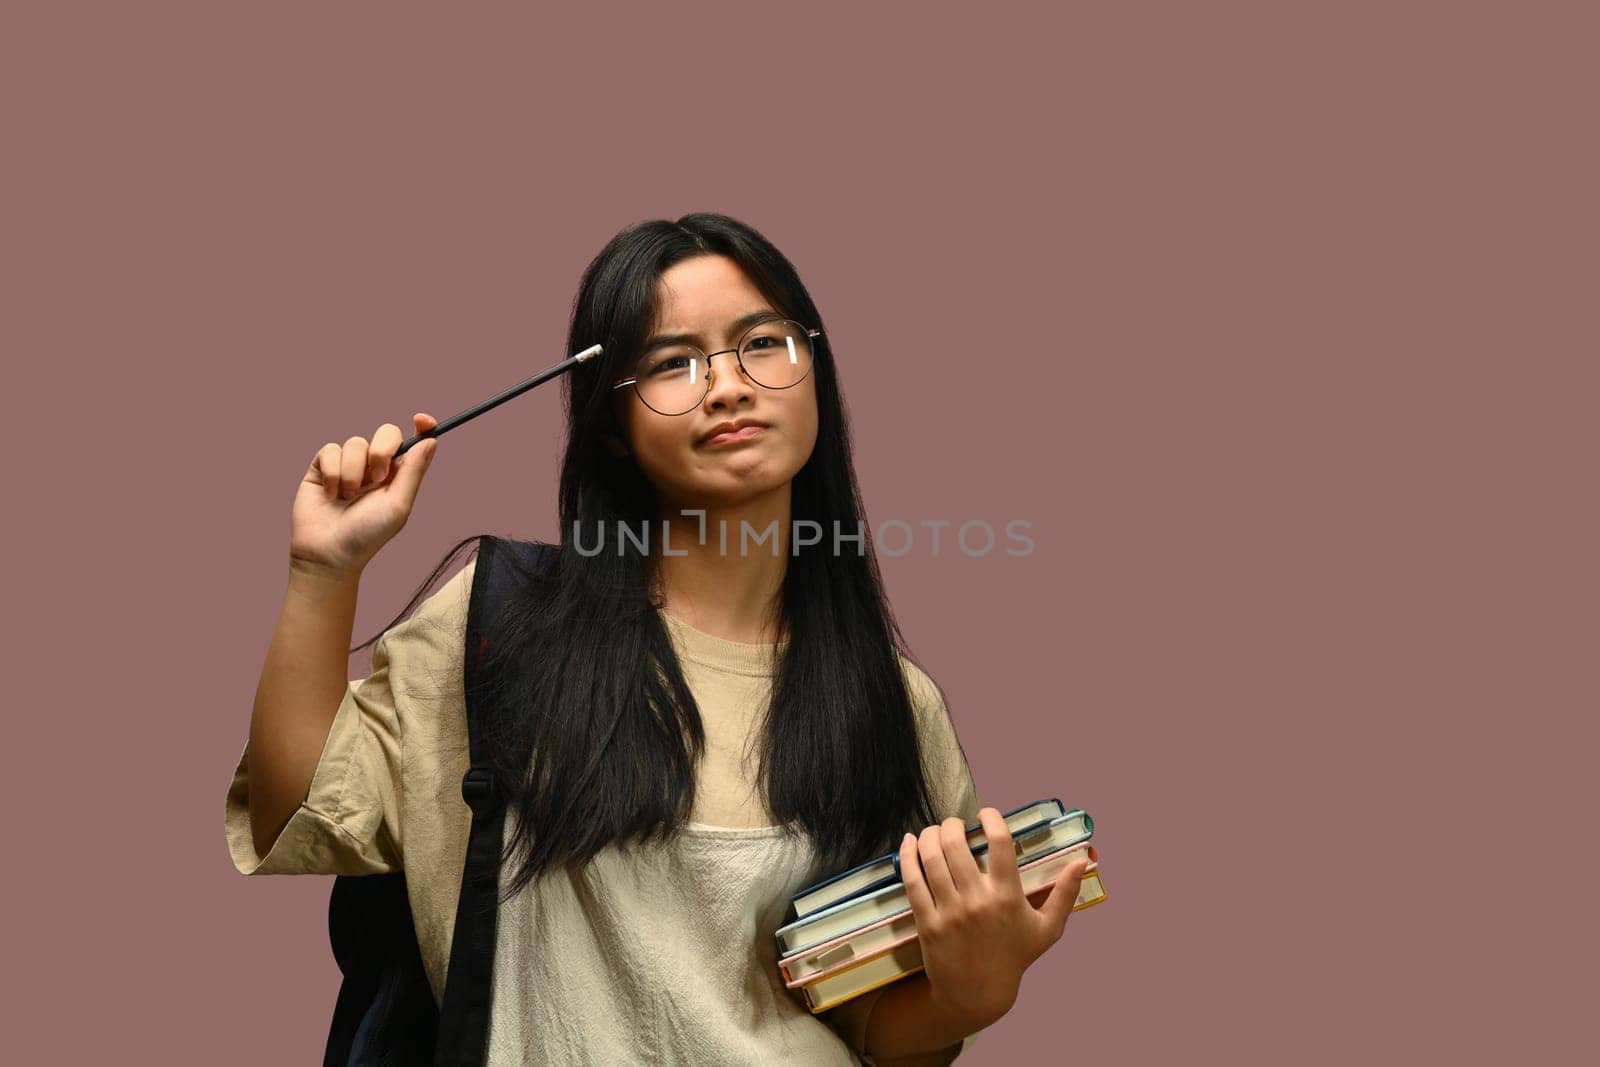 Teenager schoolgirl wearing glasses holding textbook over purple background. Educational, learning and back to school concept.